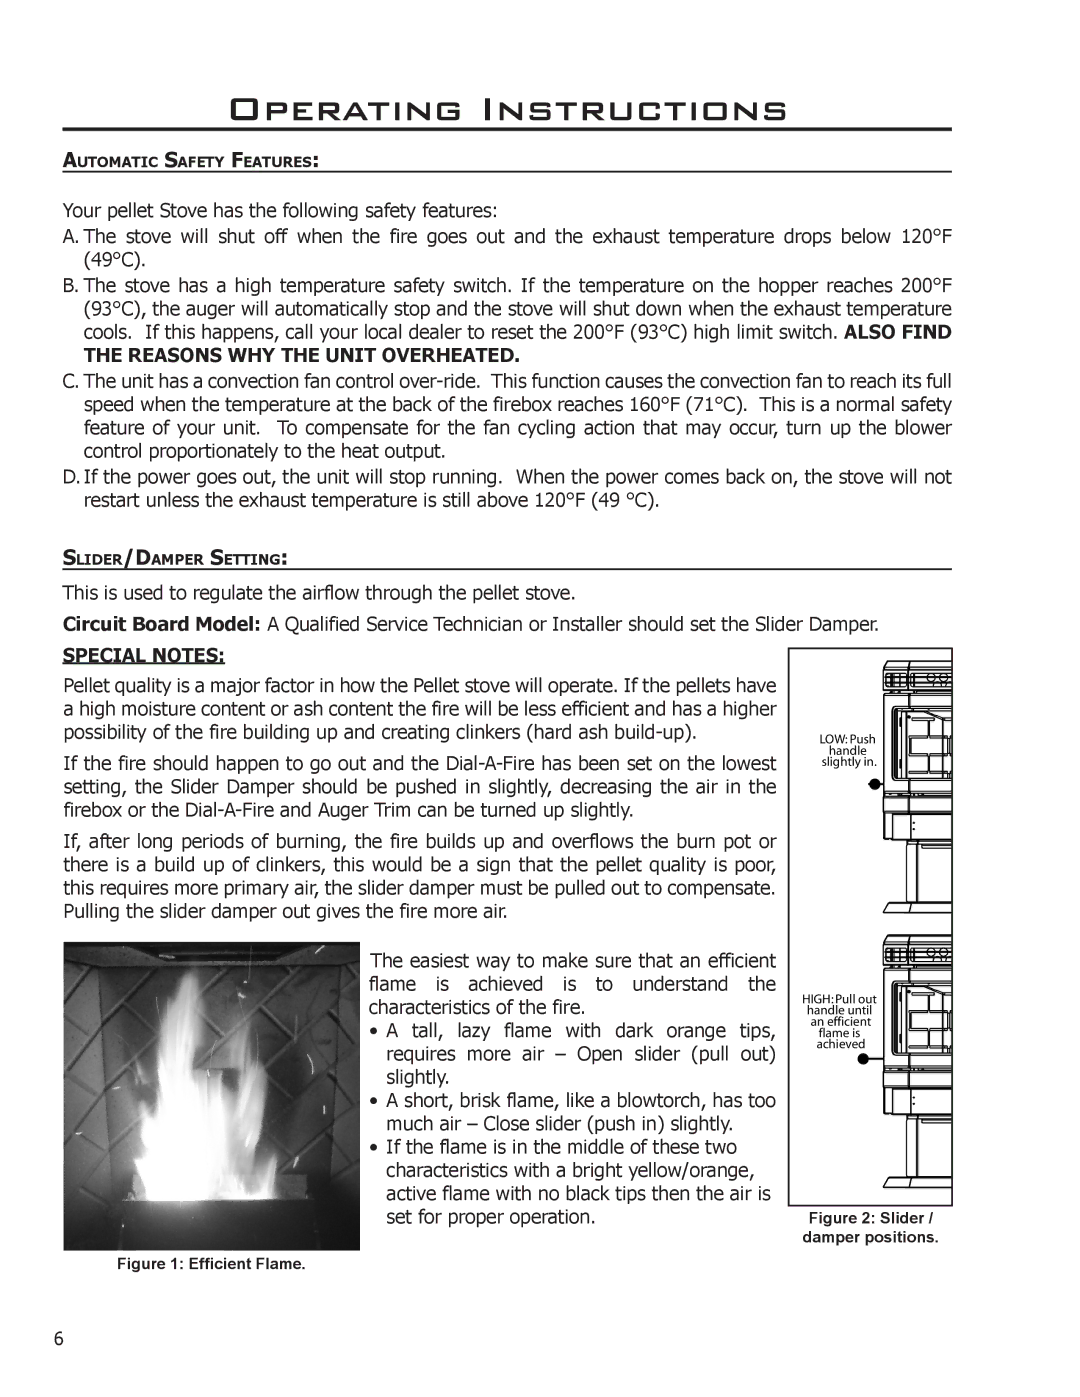 Enviro EP3 owner manual Operating Instructions, Reasons WHY the Unit Overheated, Special Notes 